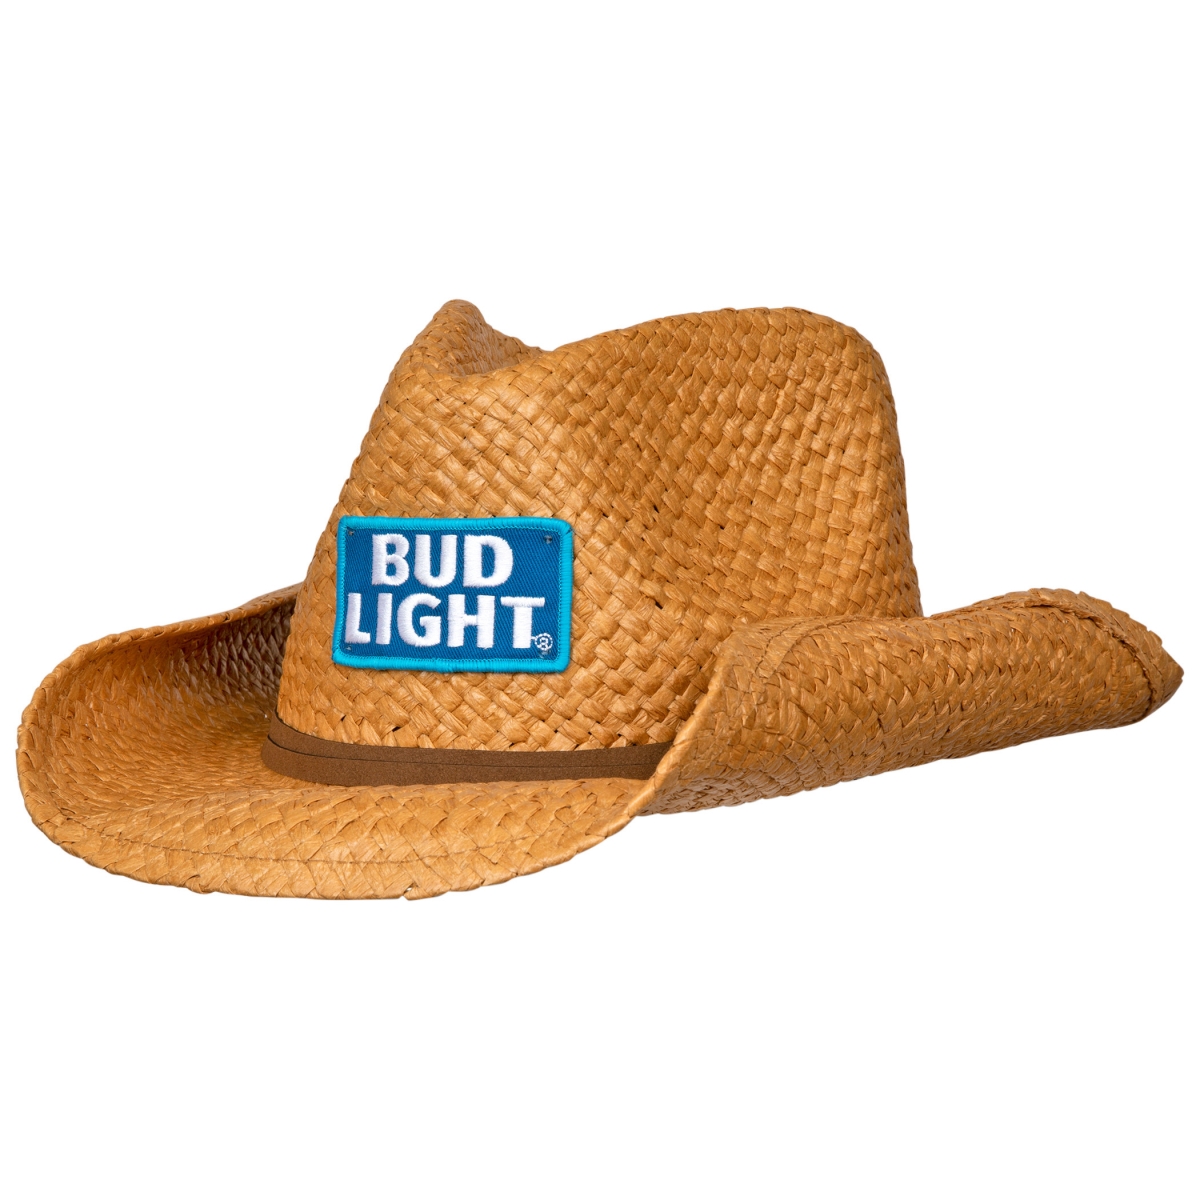 Picture of Bud Light 817728 Straw Cowboy Hat with Brown Band